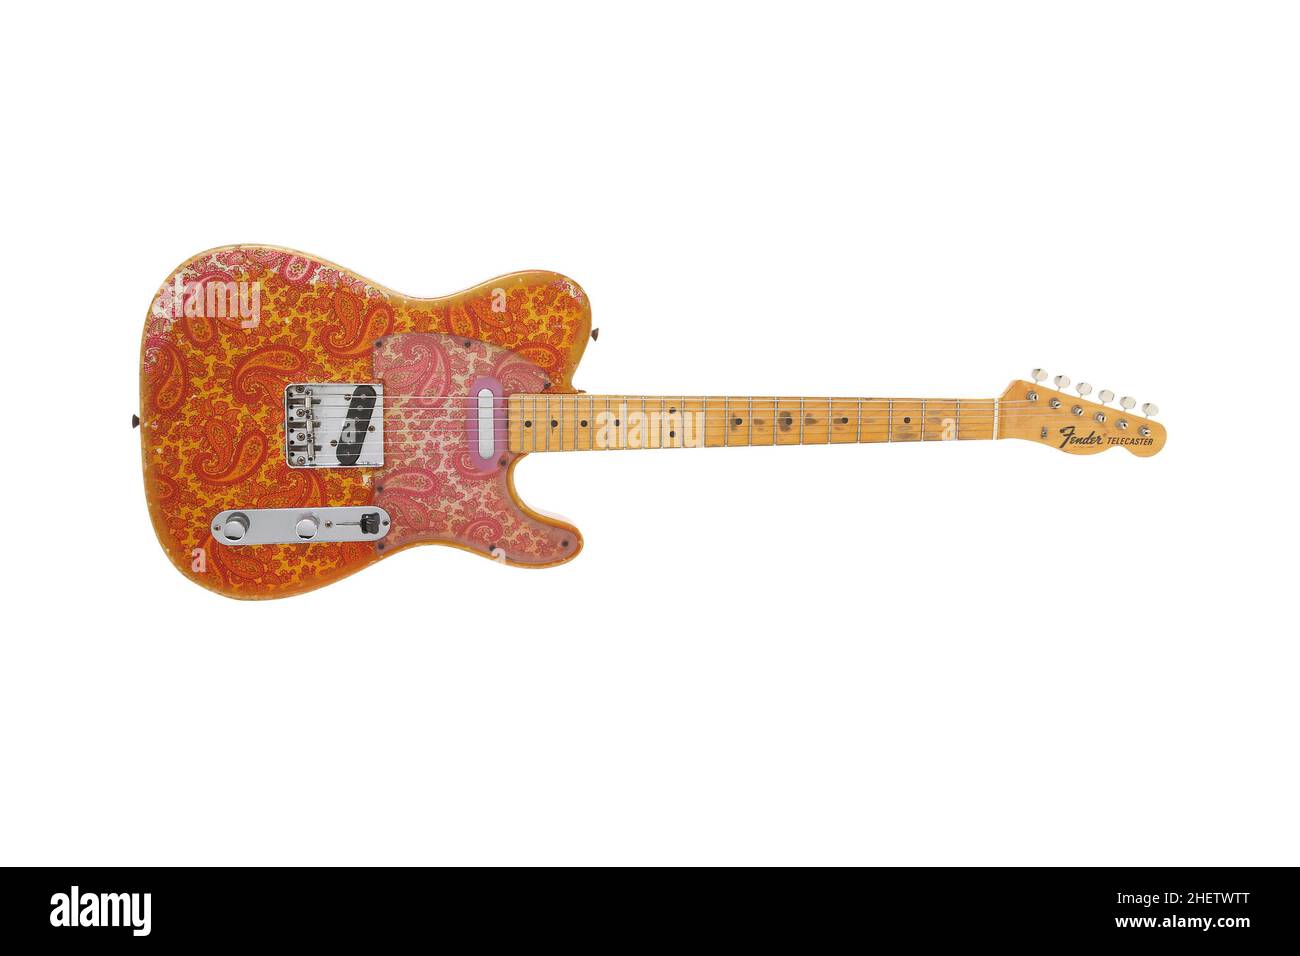 1968 Fender Telecaster Guitar, psychedelic pattern Stock Photo